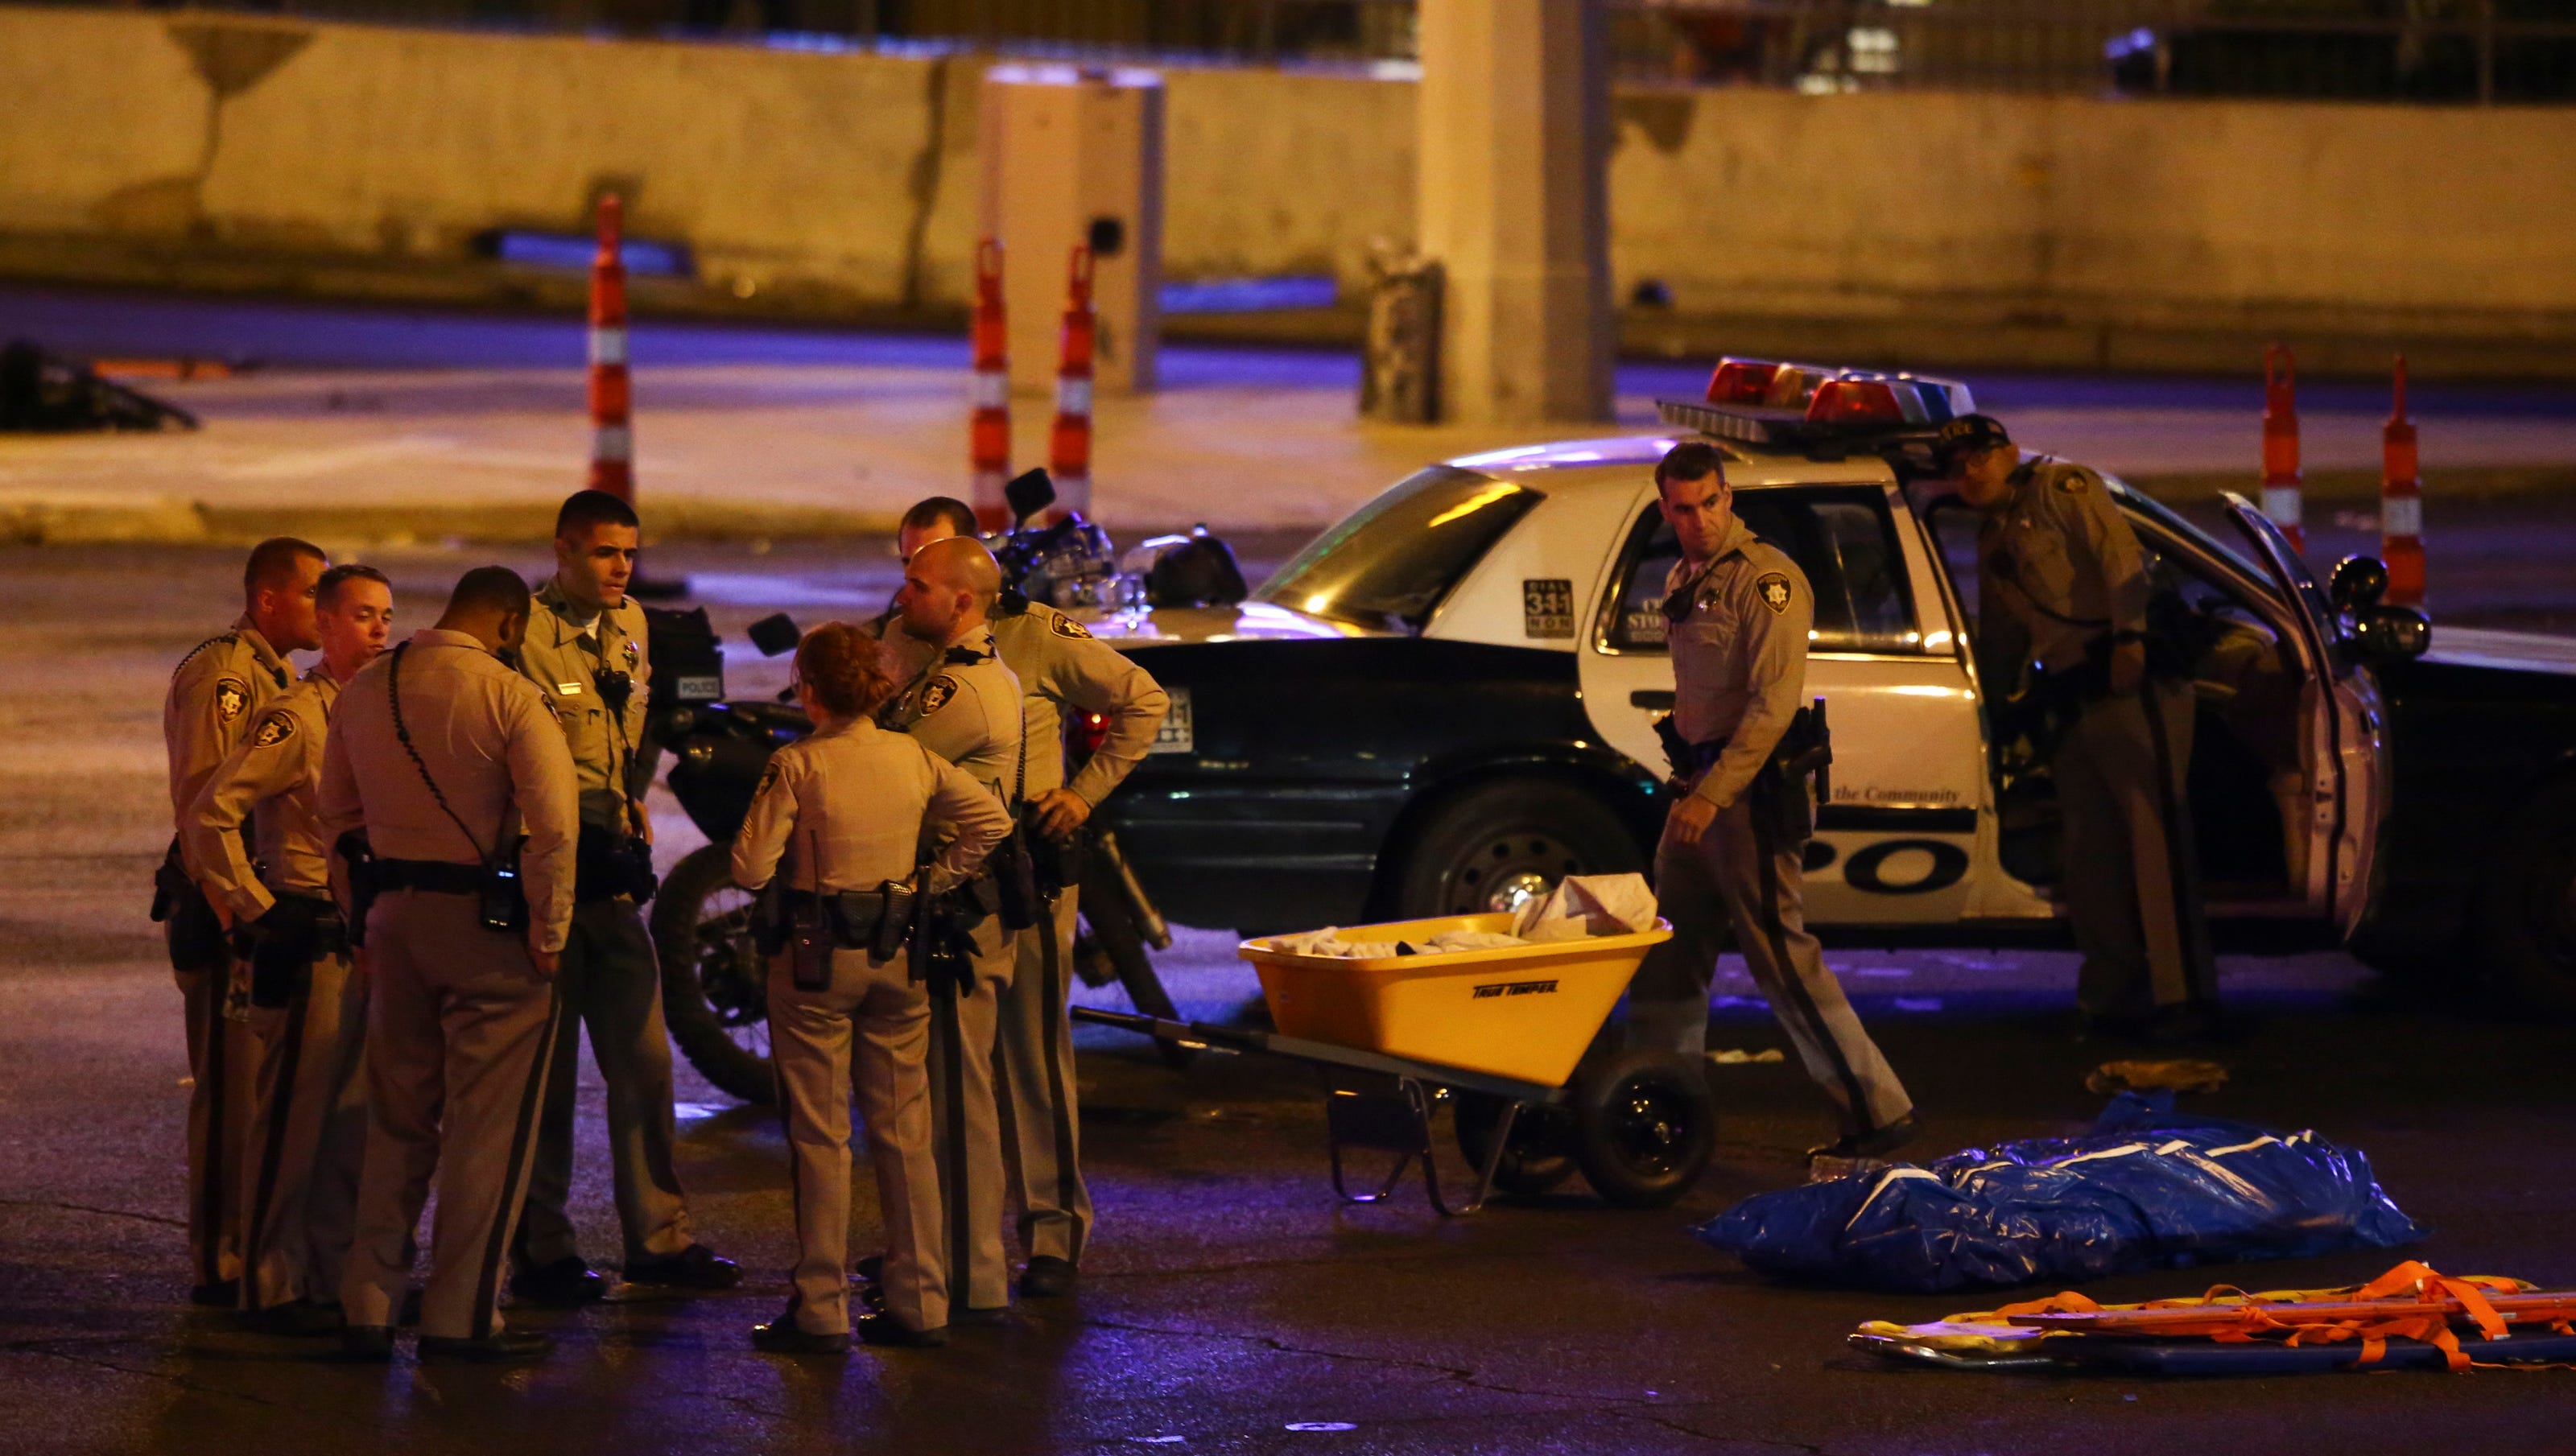 Las Vegas shooting Hoaxes arise online after tragedy